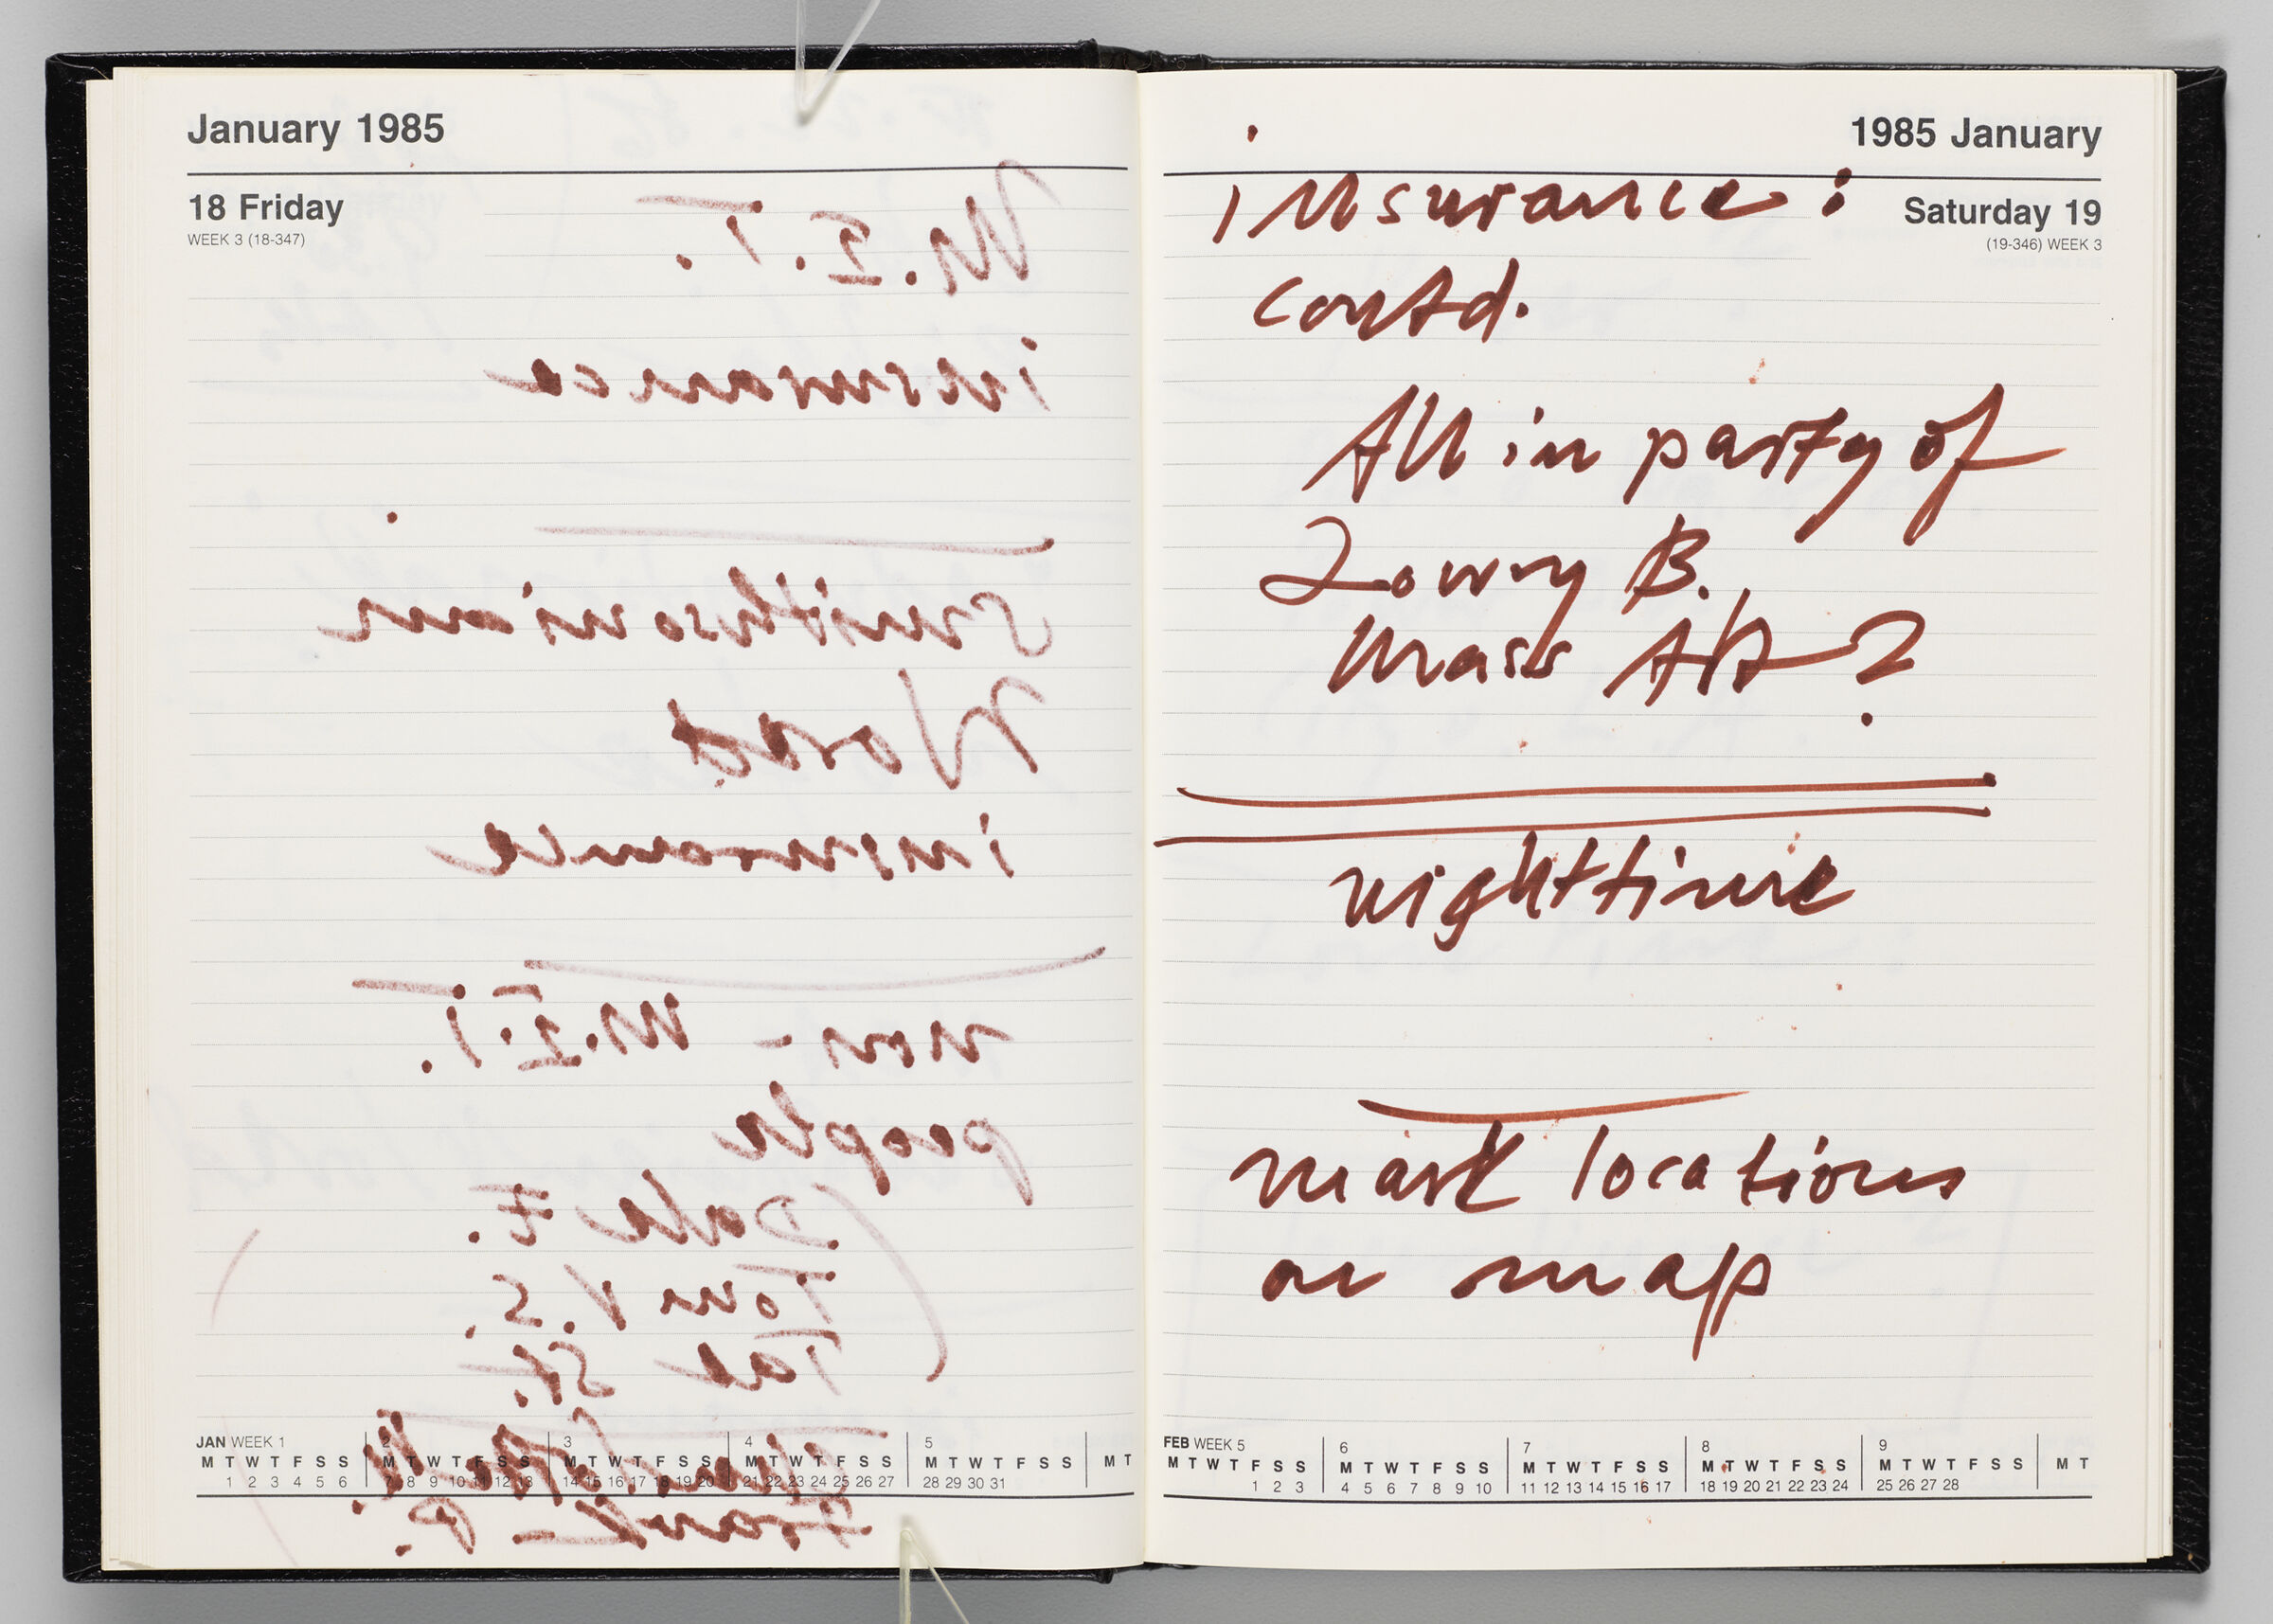 Untitled (Bleed-Through Of Previous Page, Left Page); Untitled (Notes On Calendar Page January 19, 1985, Right Page)